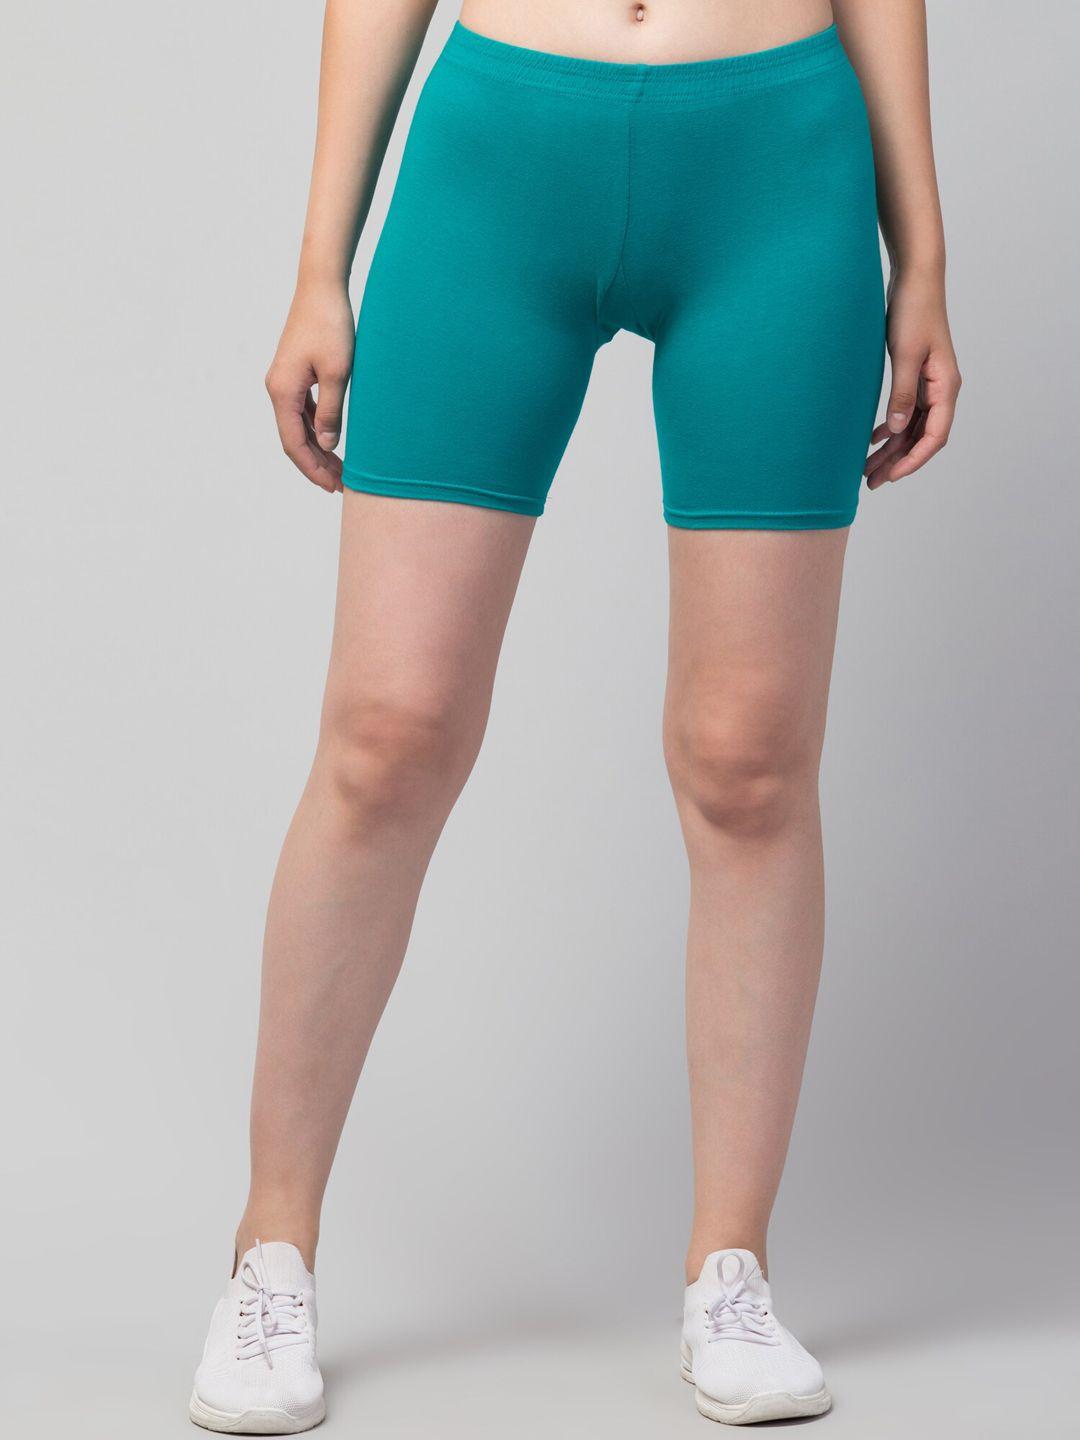 apraa & parma women rama green solid cotton skinny fit cycling sports shorts